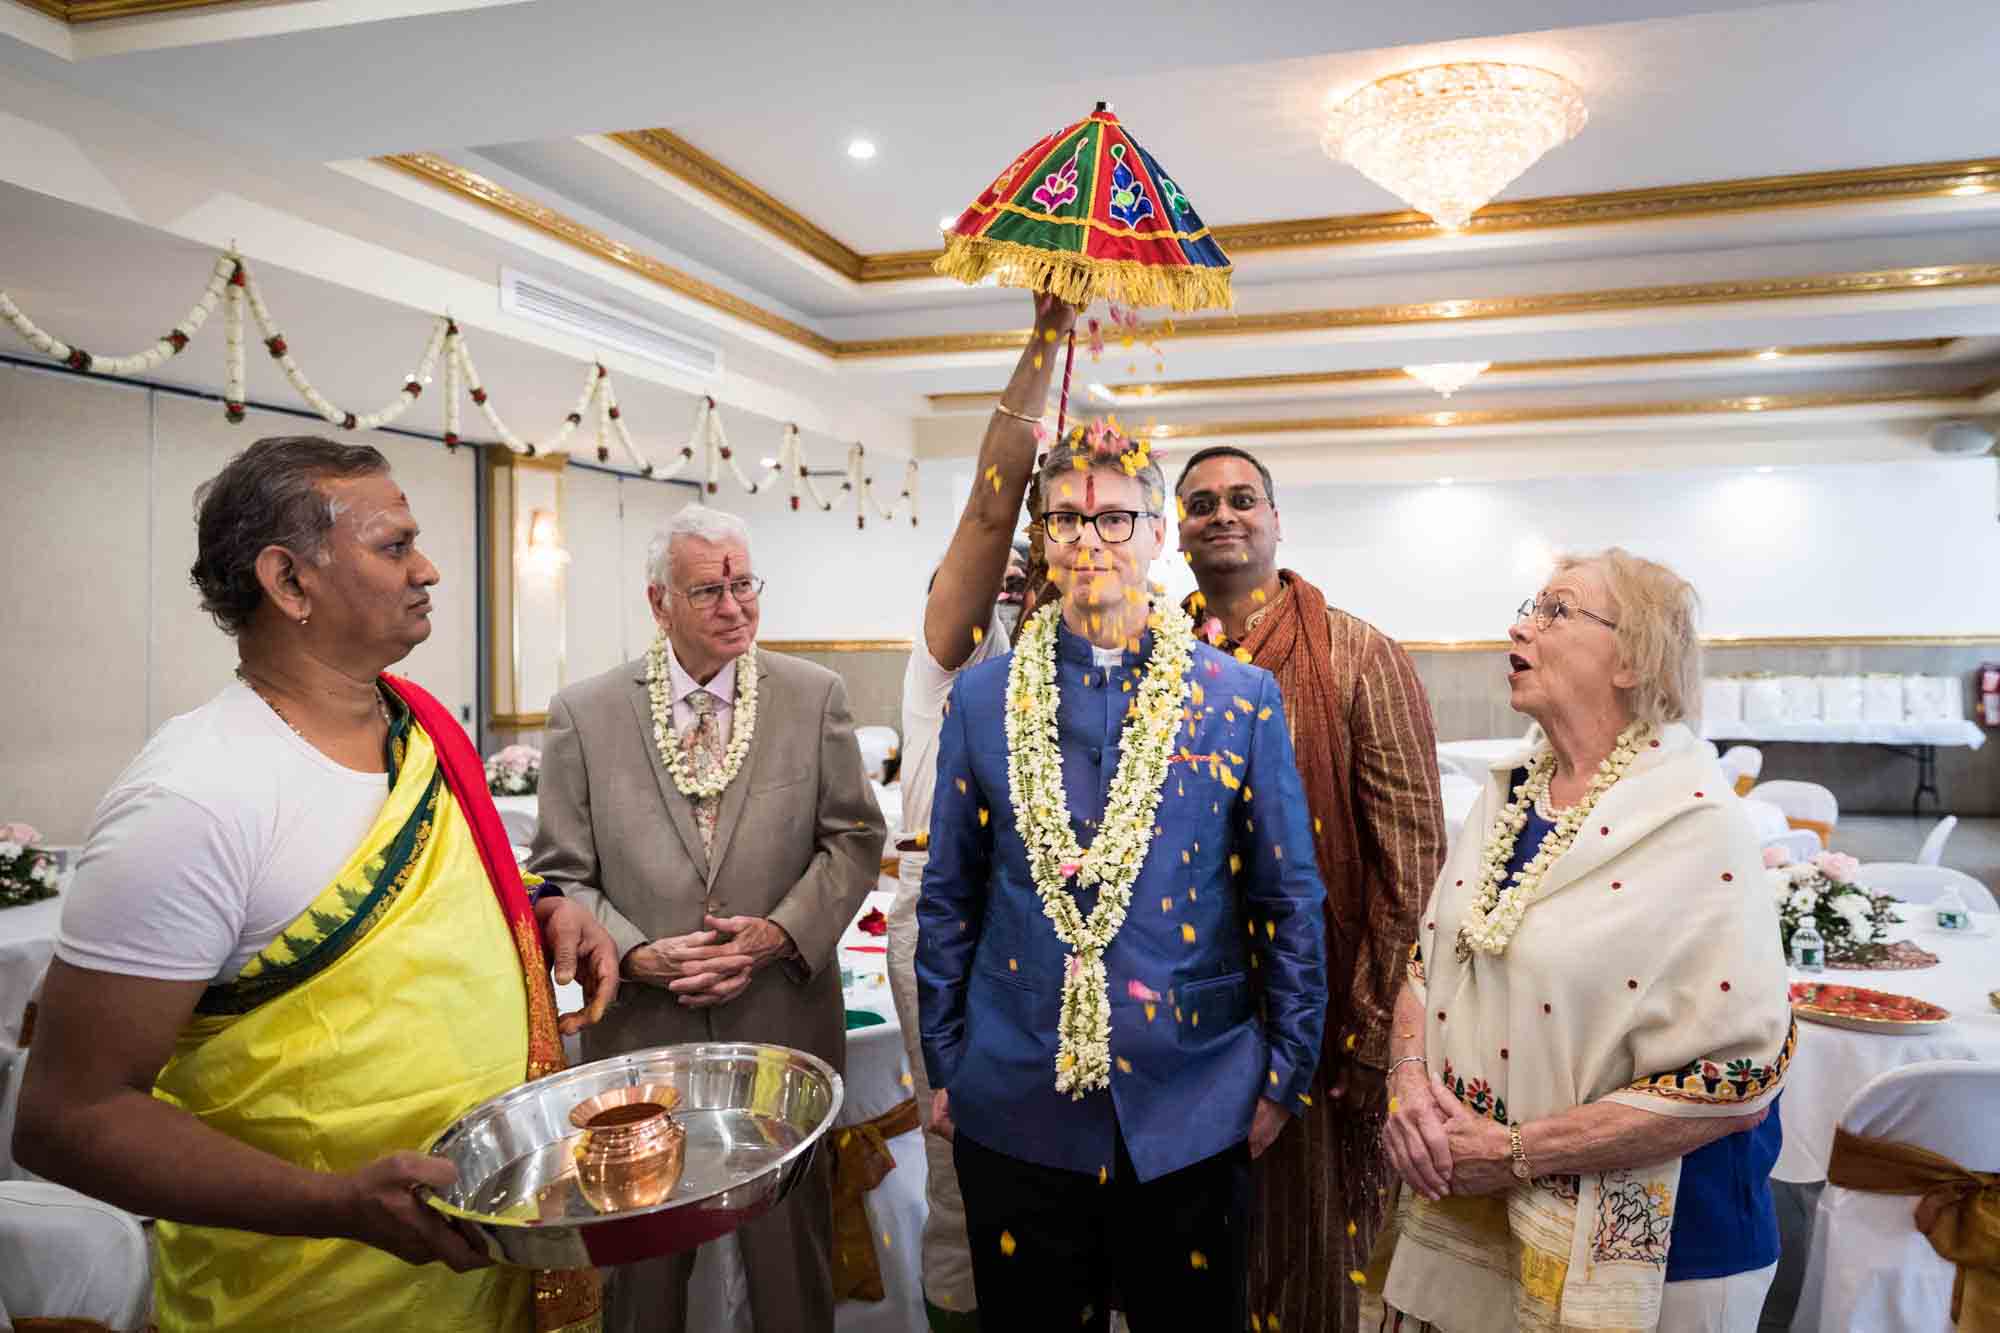 Hindu Temple Society of North America wedding photos of groom with umbrella over his head surrounded by priest and family